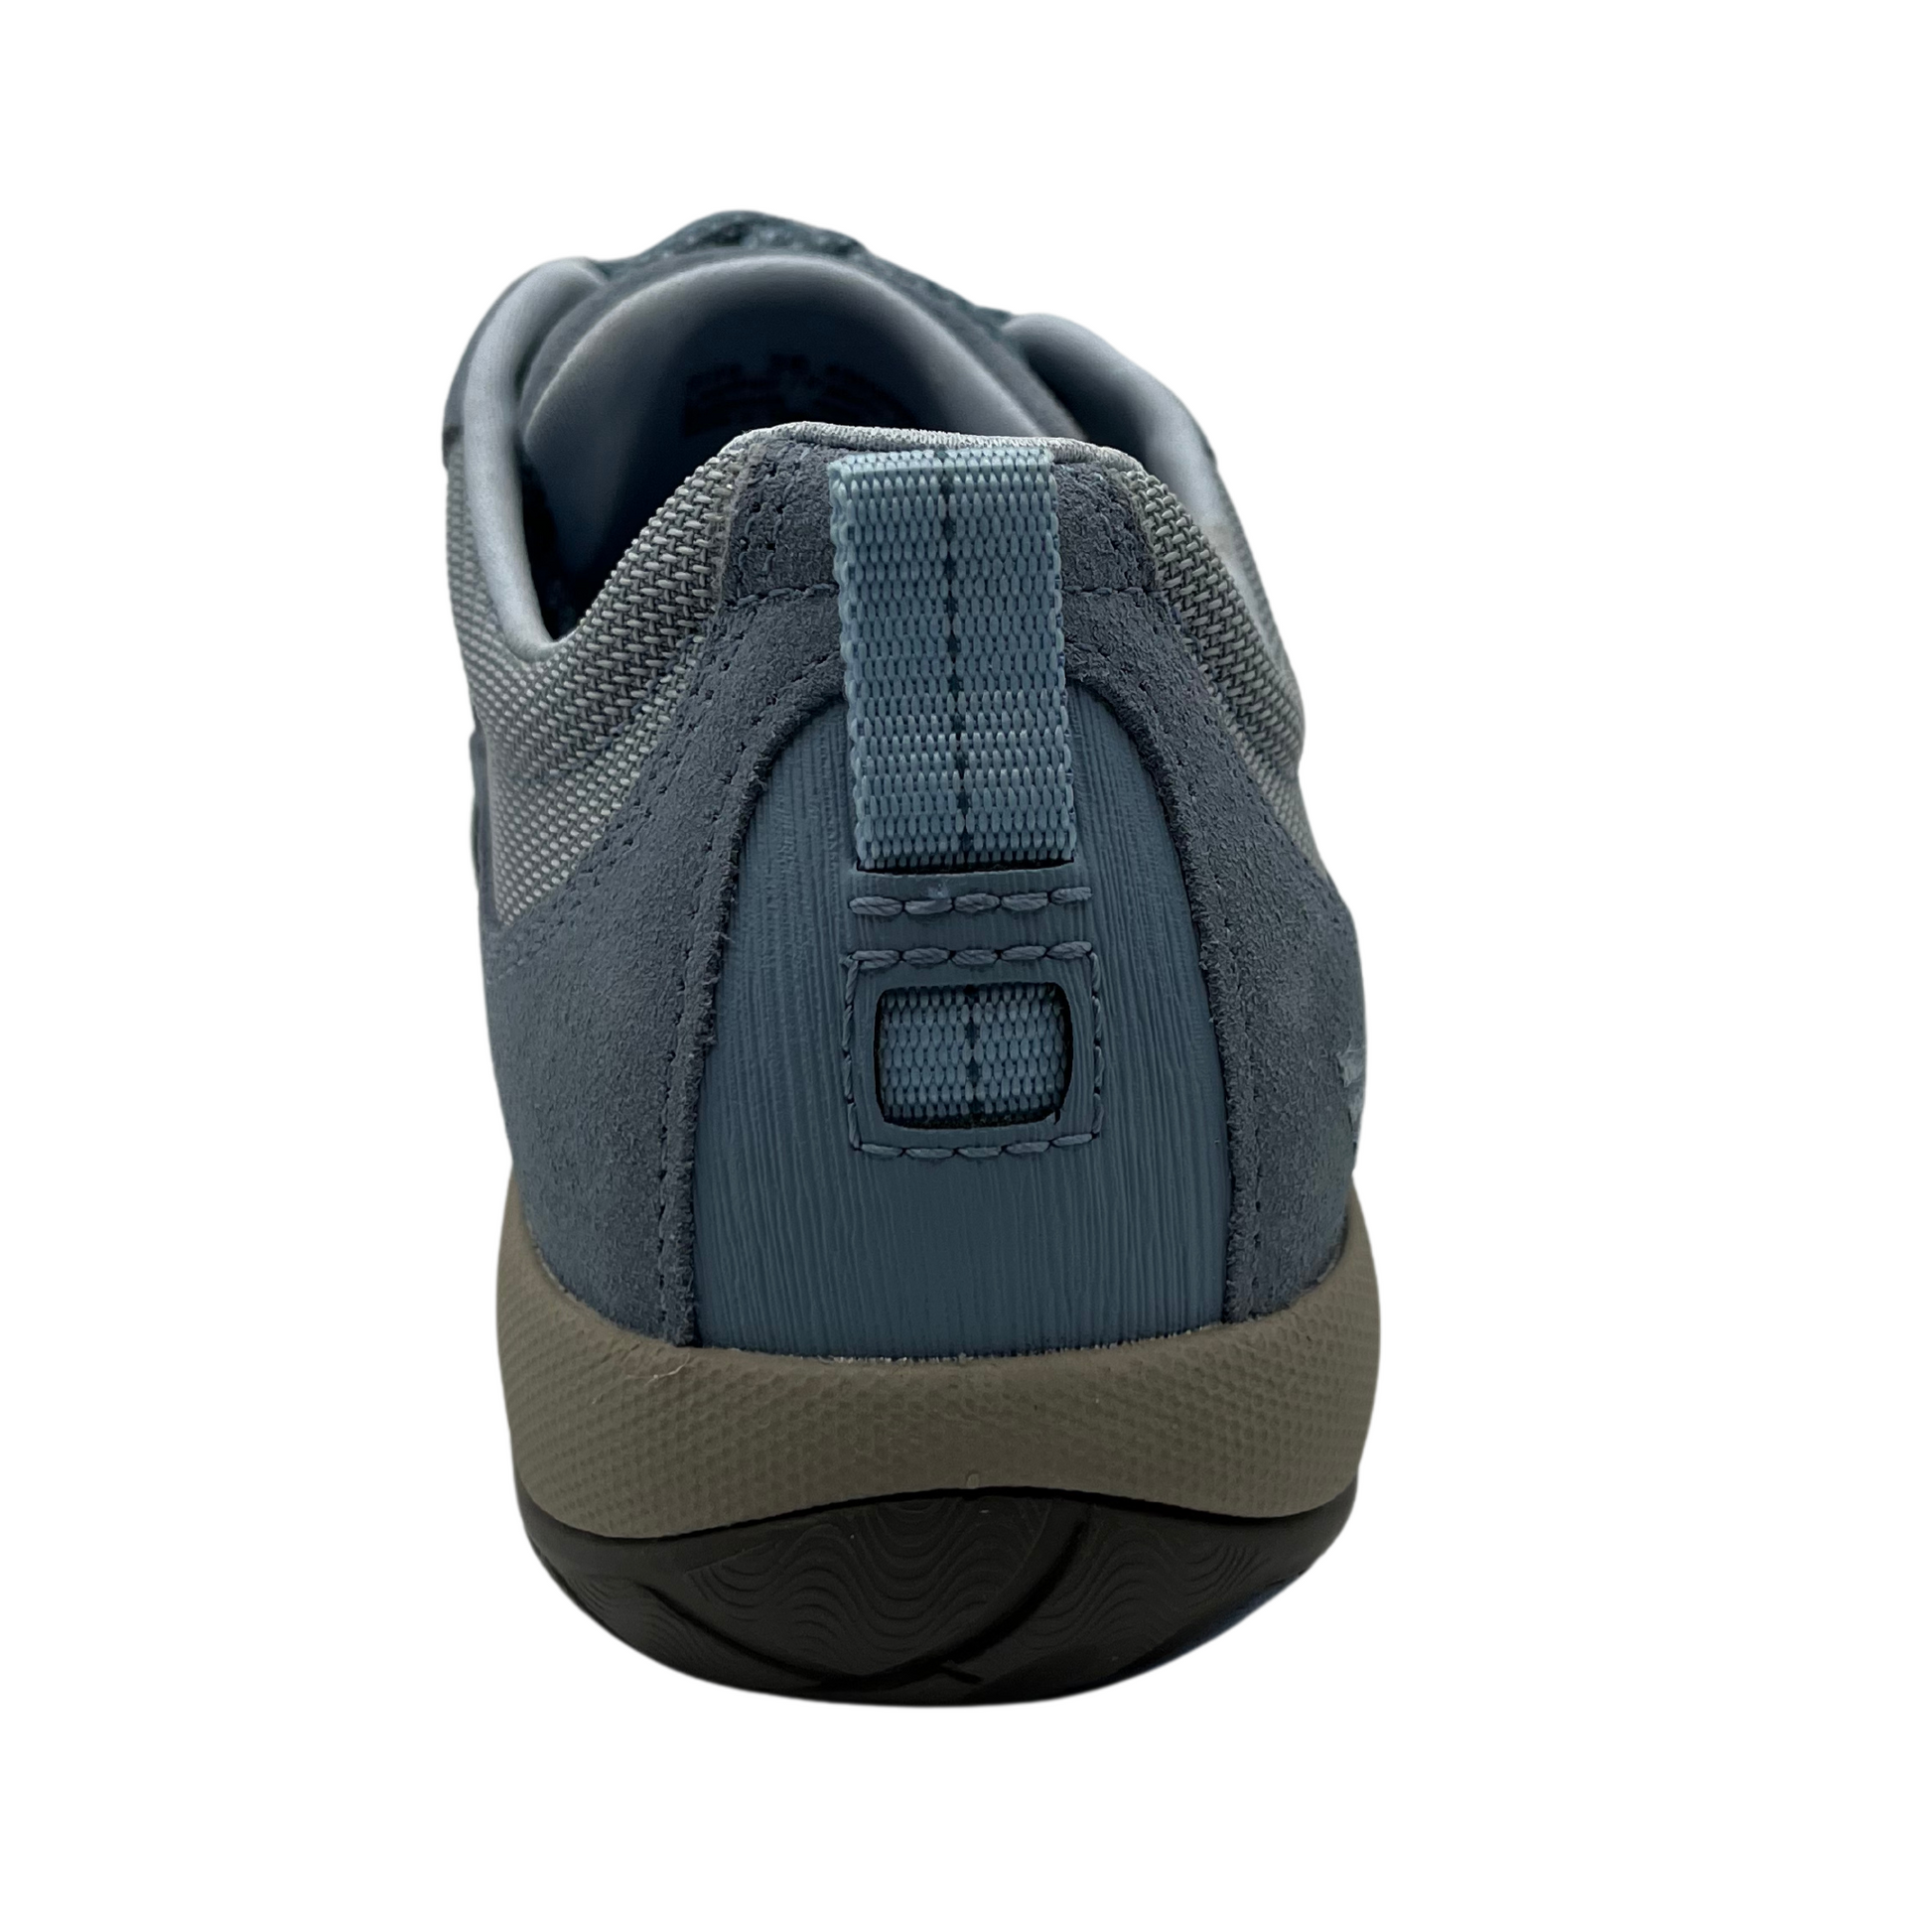 Back view of sky blue hiking shoe with vibram rubber outsole